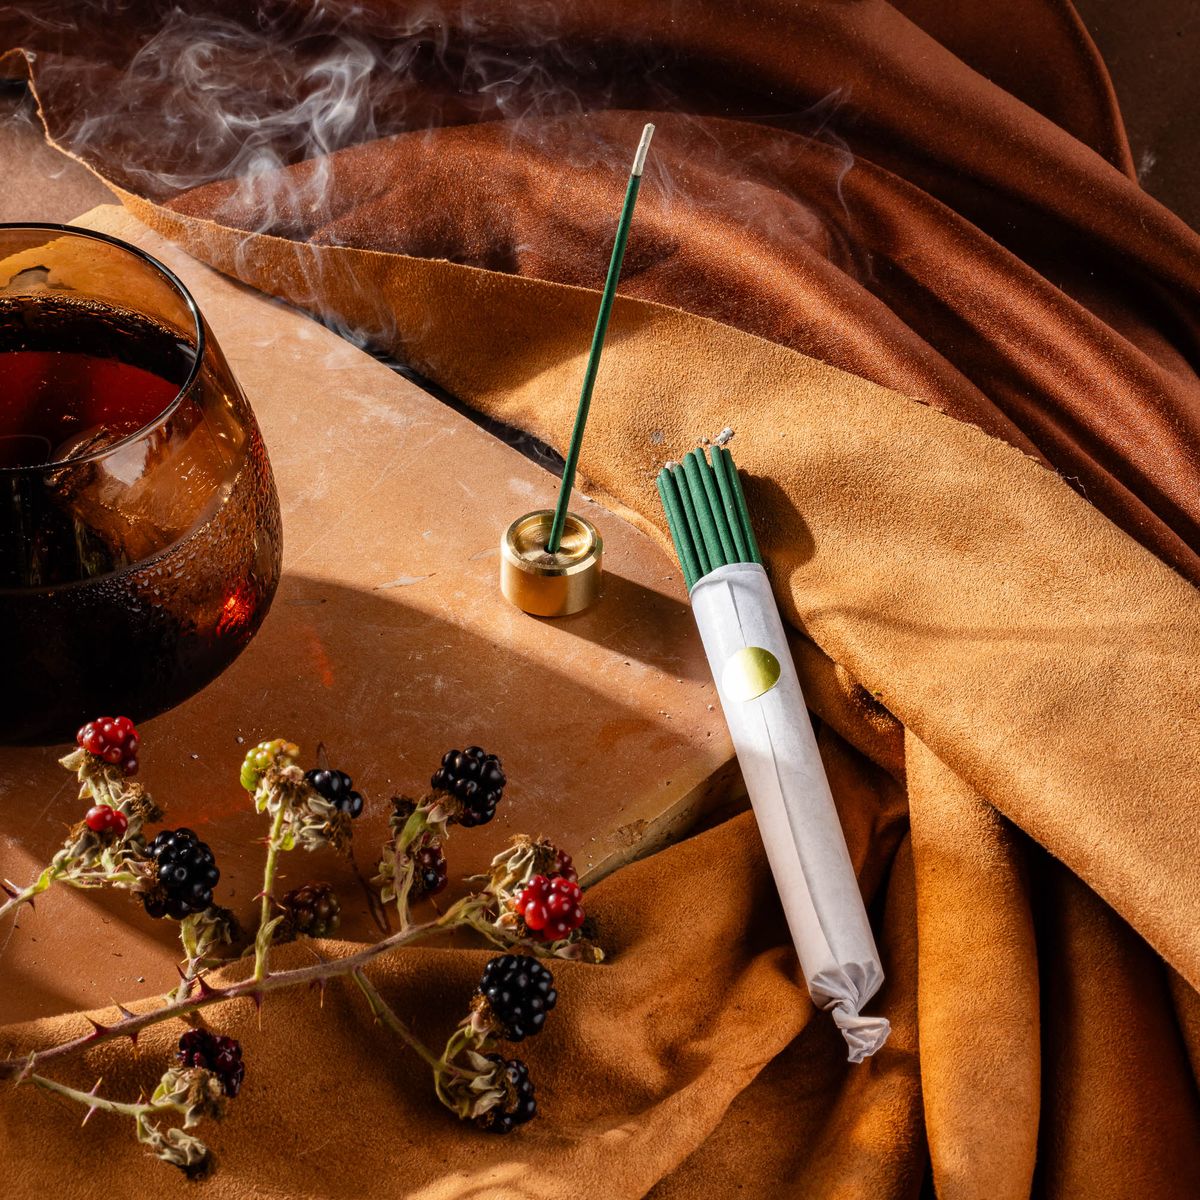 A bundle of teal incense sticks wrapped in paper sits next to a burning incense stick in a small brass holder. Both items are surrounded by a branch of berries and a whiskey snifter glass, on brown fabric. 